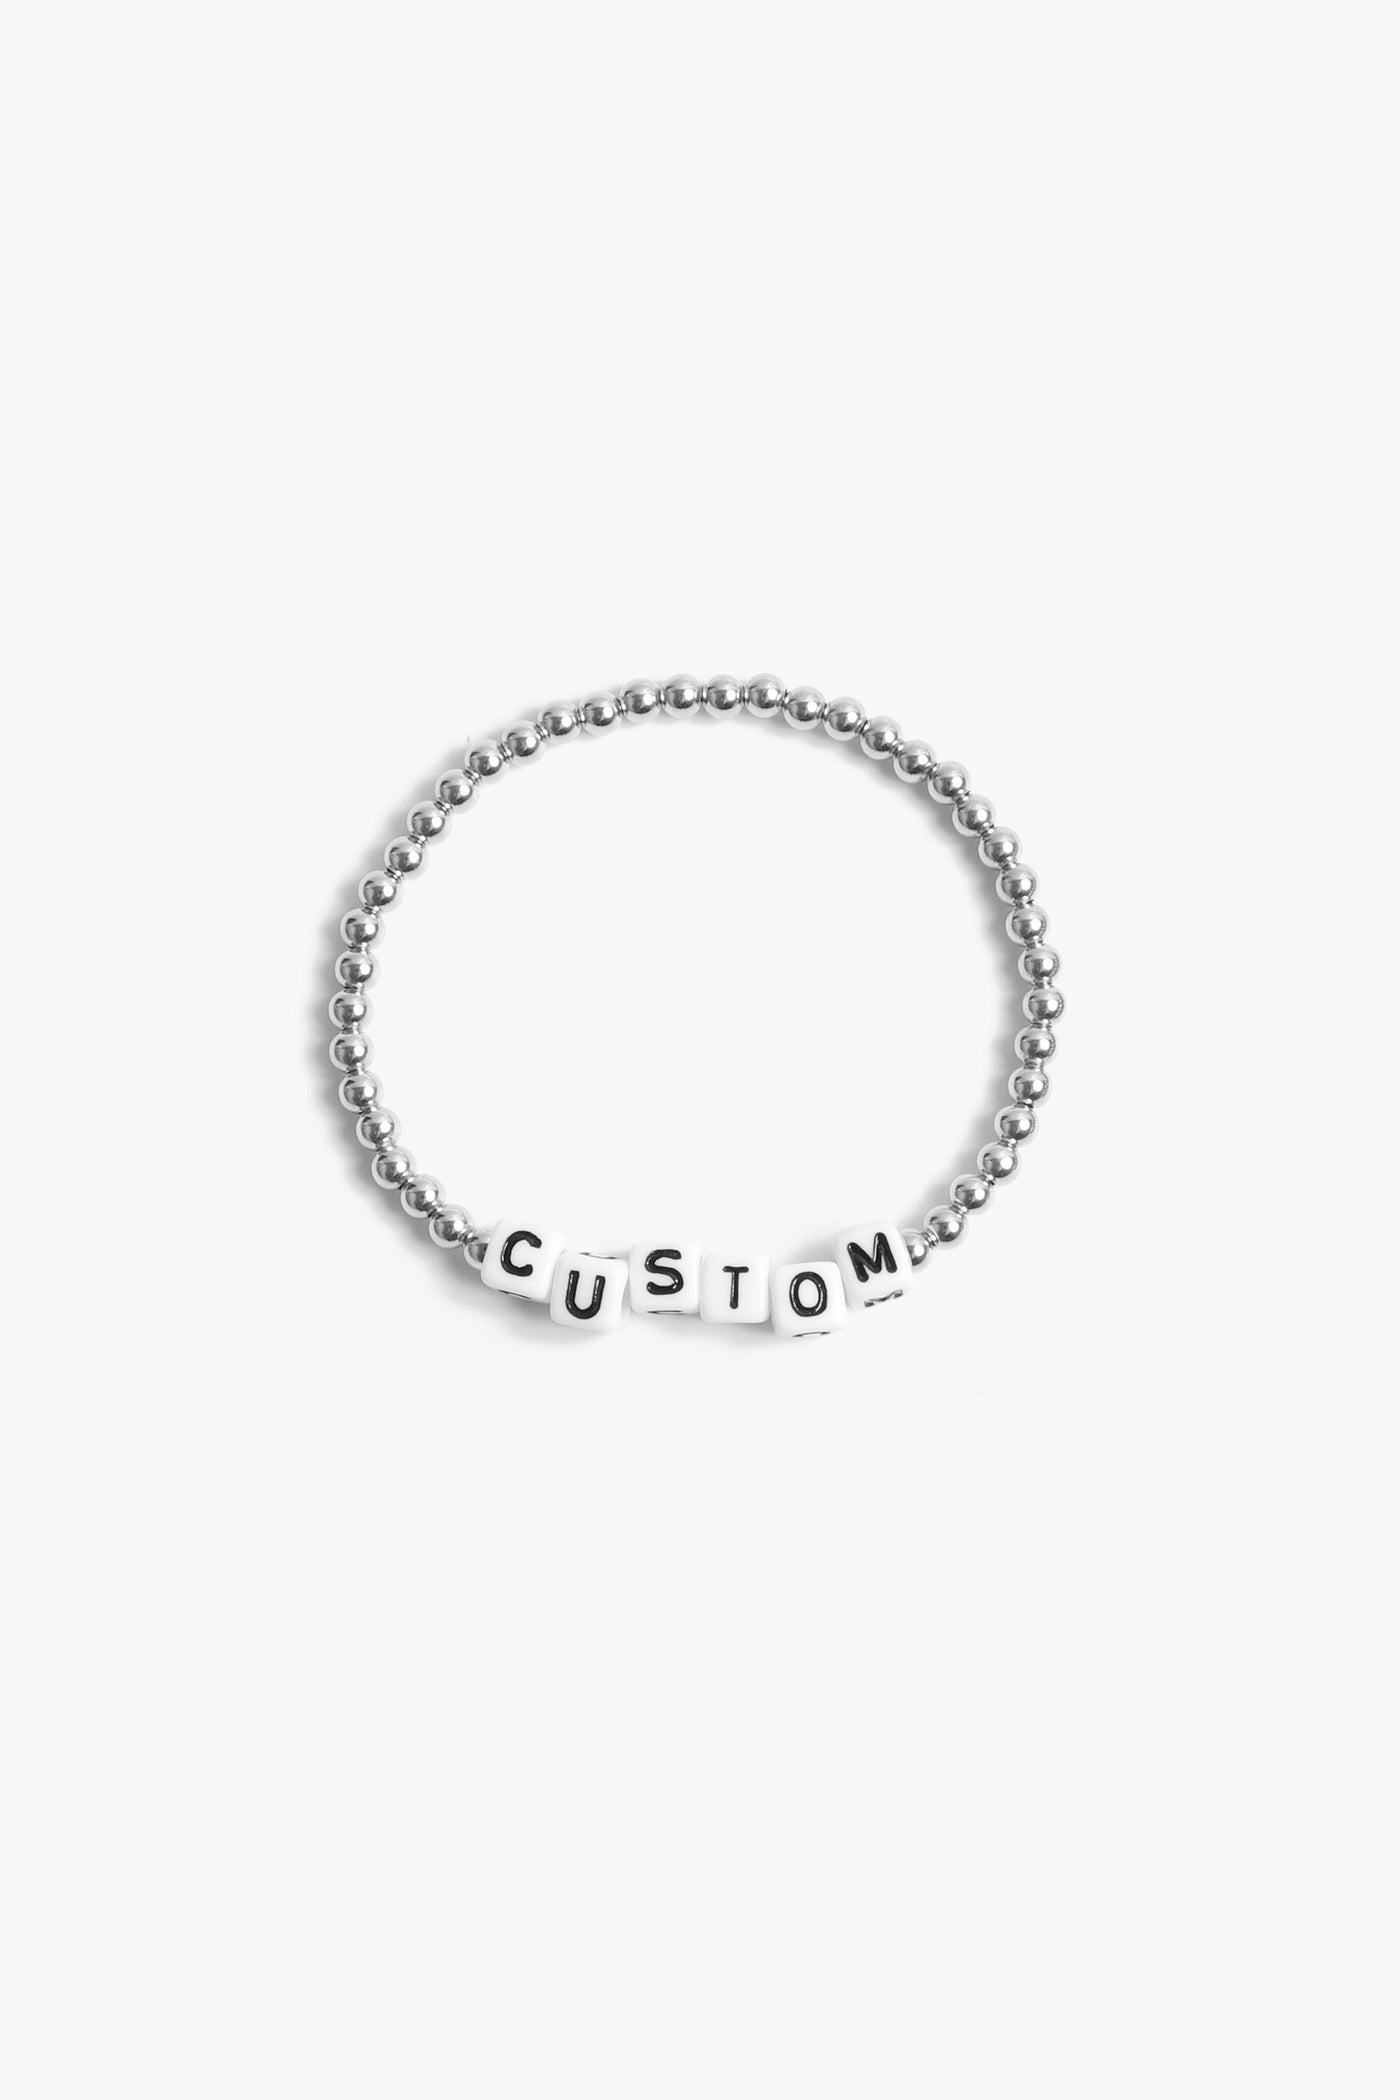 Marin Costello Jewelry Crown Letter Bracelet beaded block letter bracelet, customizable. White block letters, silver beads. Waterproof, sustainable, hypoallergenic. Polished stainless steel.